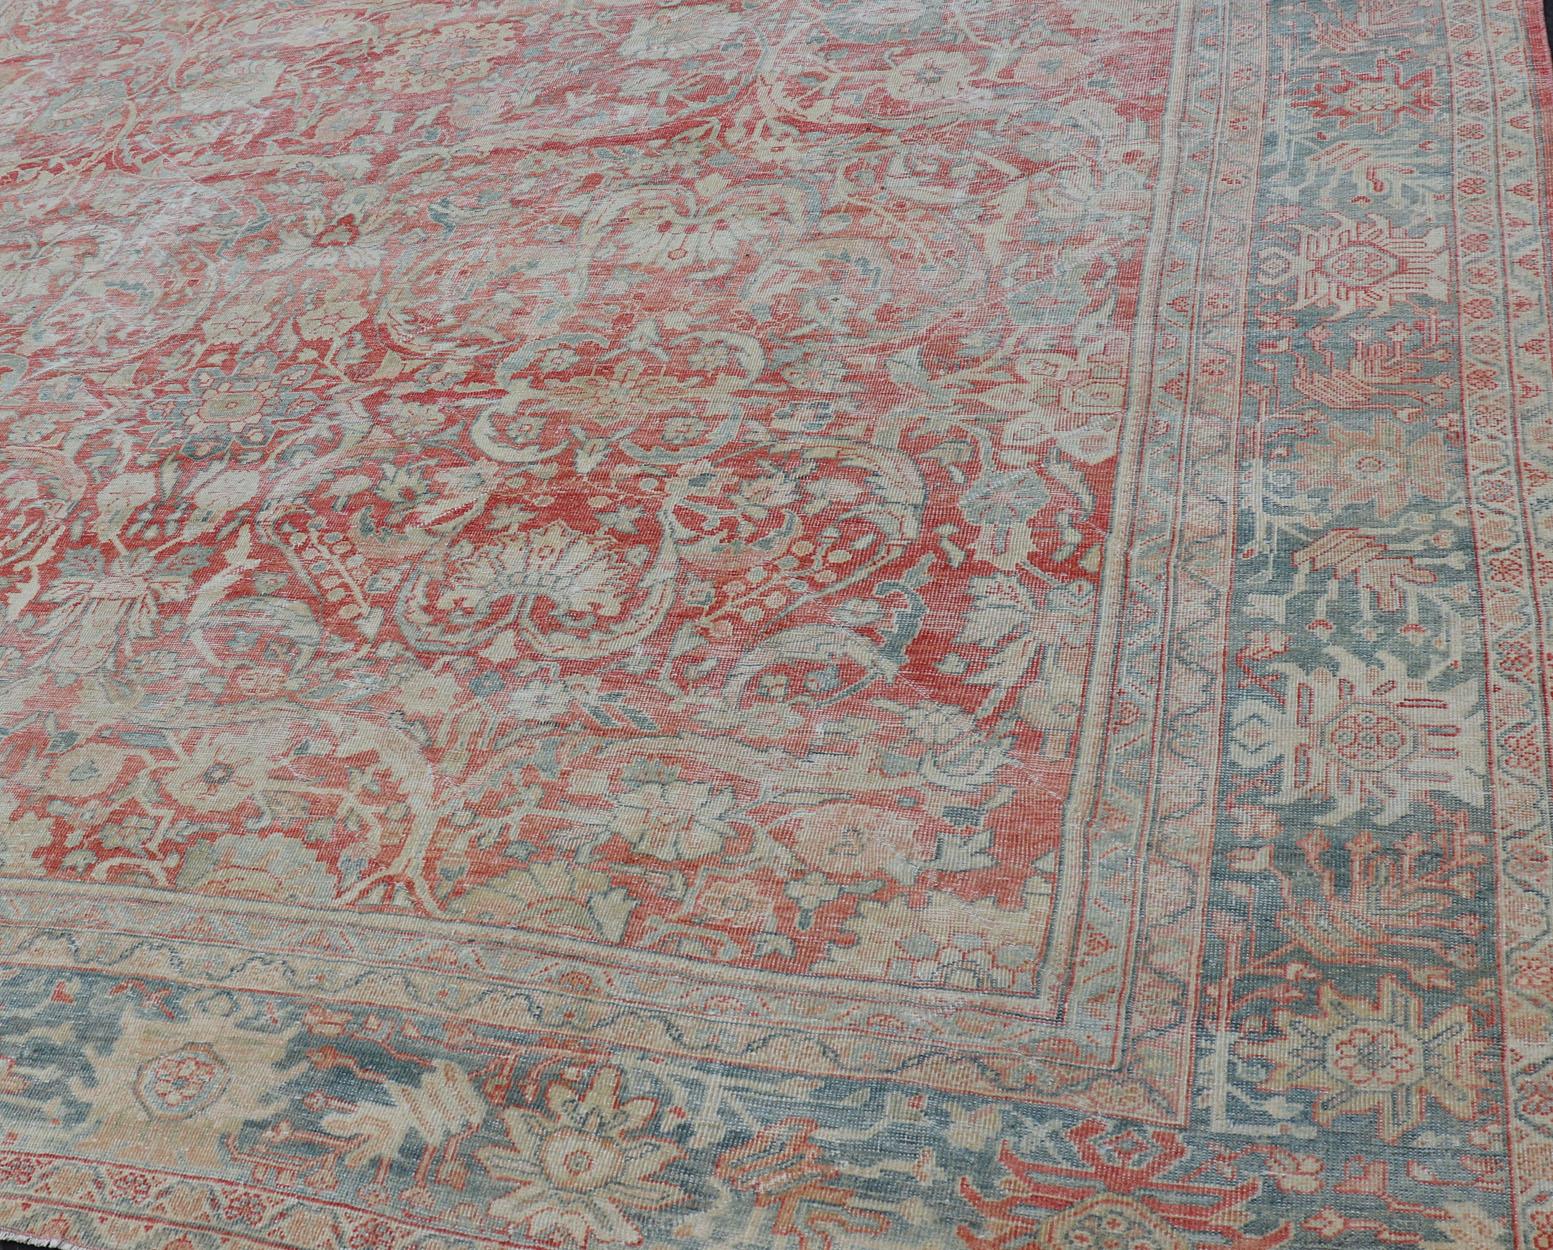 Distressed antique Persian Sultanabad rug in faded colors. Sultanabad Mahal antique rug from Persia with all-over geometric design, Keivan Woven Arts / rug EMB-9558-P13029, country of origin / type: Iran / Mahal, circa 1920s faded red background,